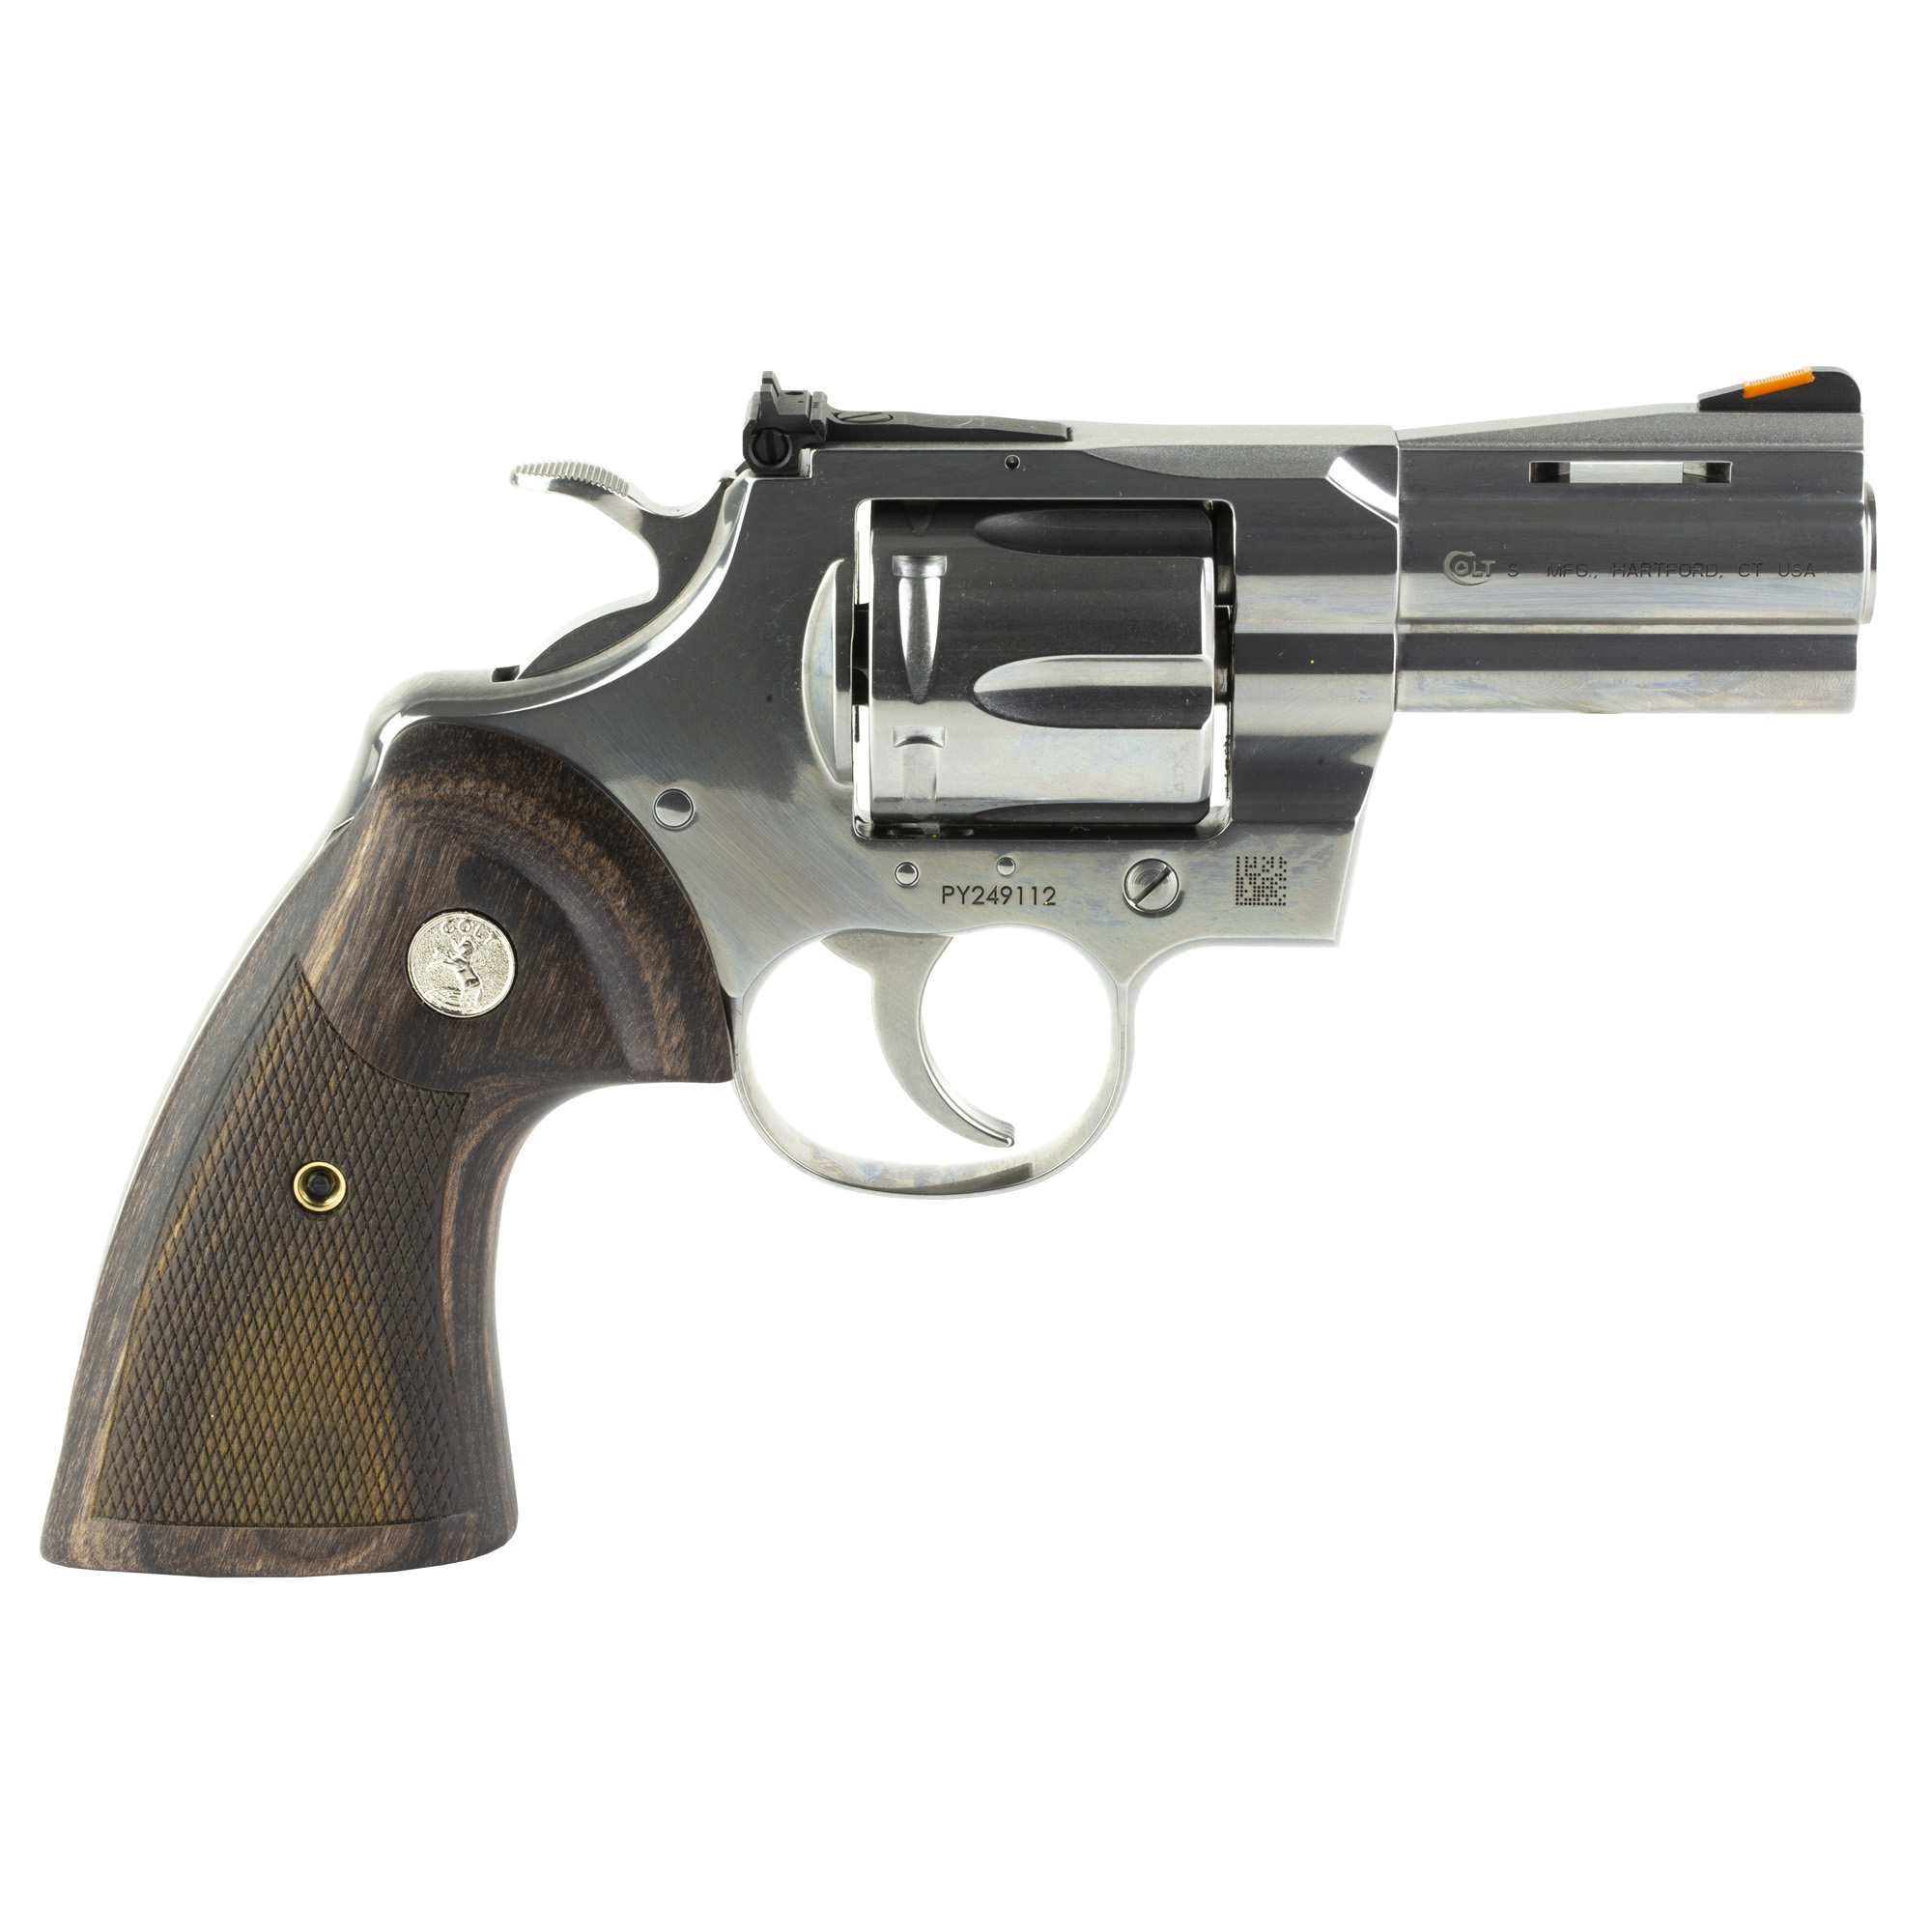 Colt's Manufacturing, Python, Double Action, Steel Frame Revolver, 357 Magnum, 3" Barrel, Stainless Steel Finish, Silver, Walnut Target Grips, Blade Front/Adjustable Rear Sights, 6 Rounds